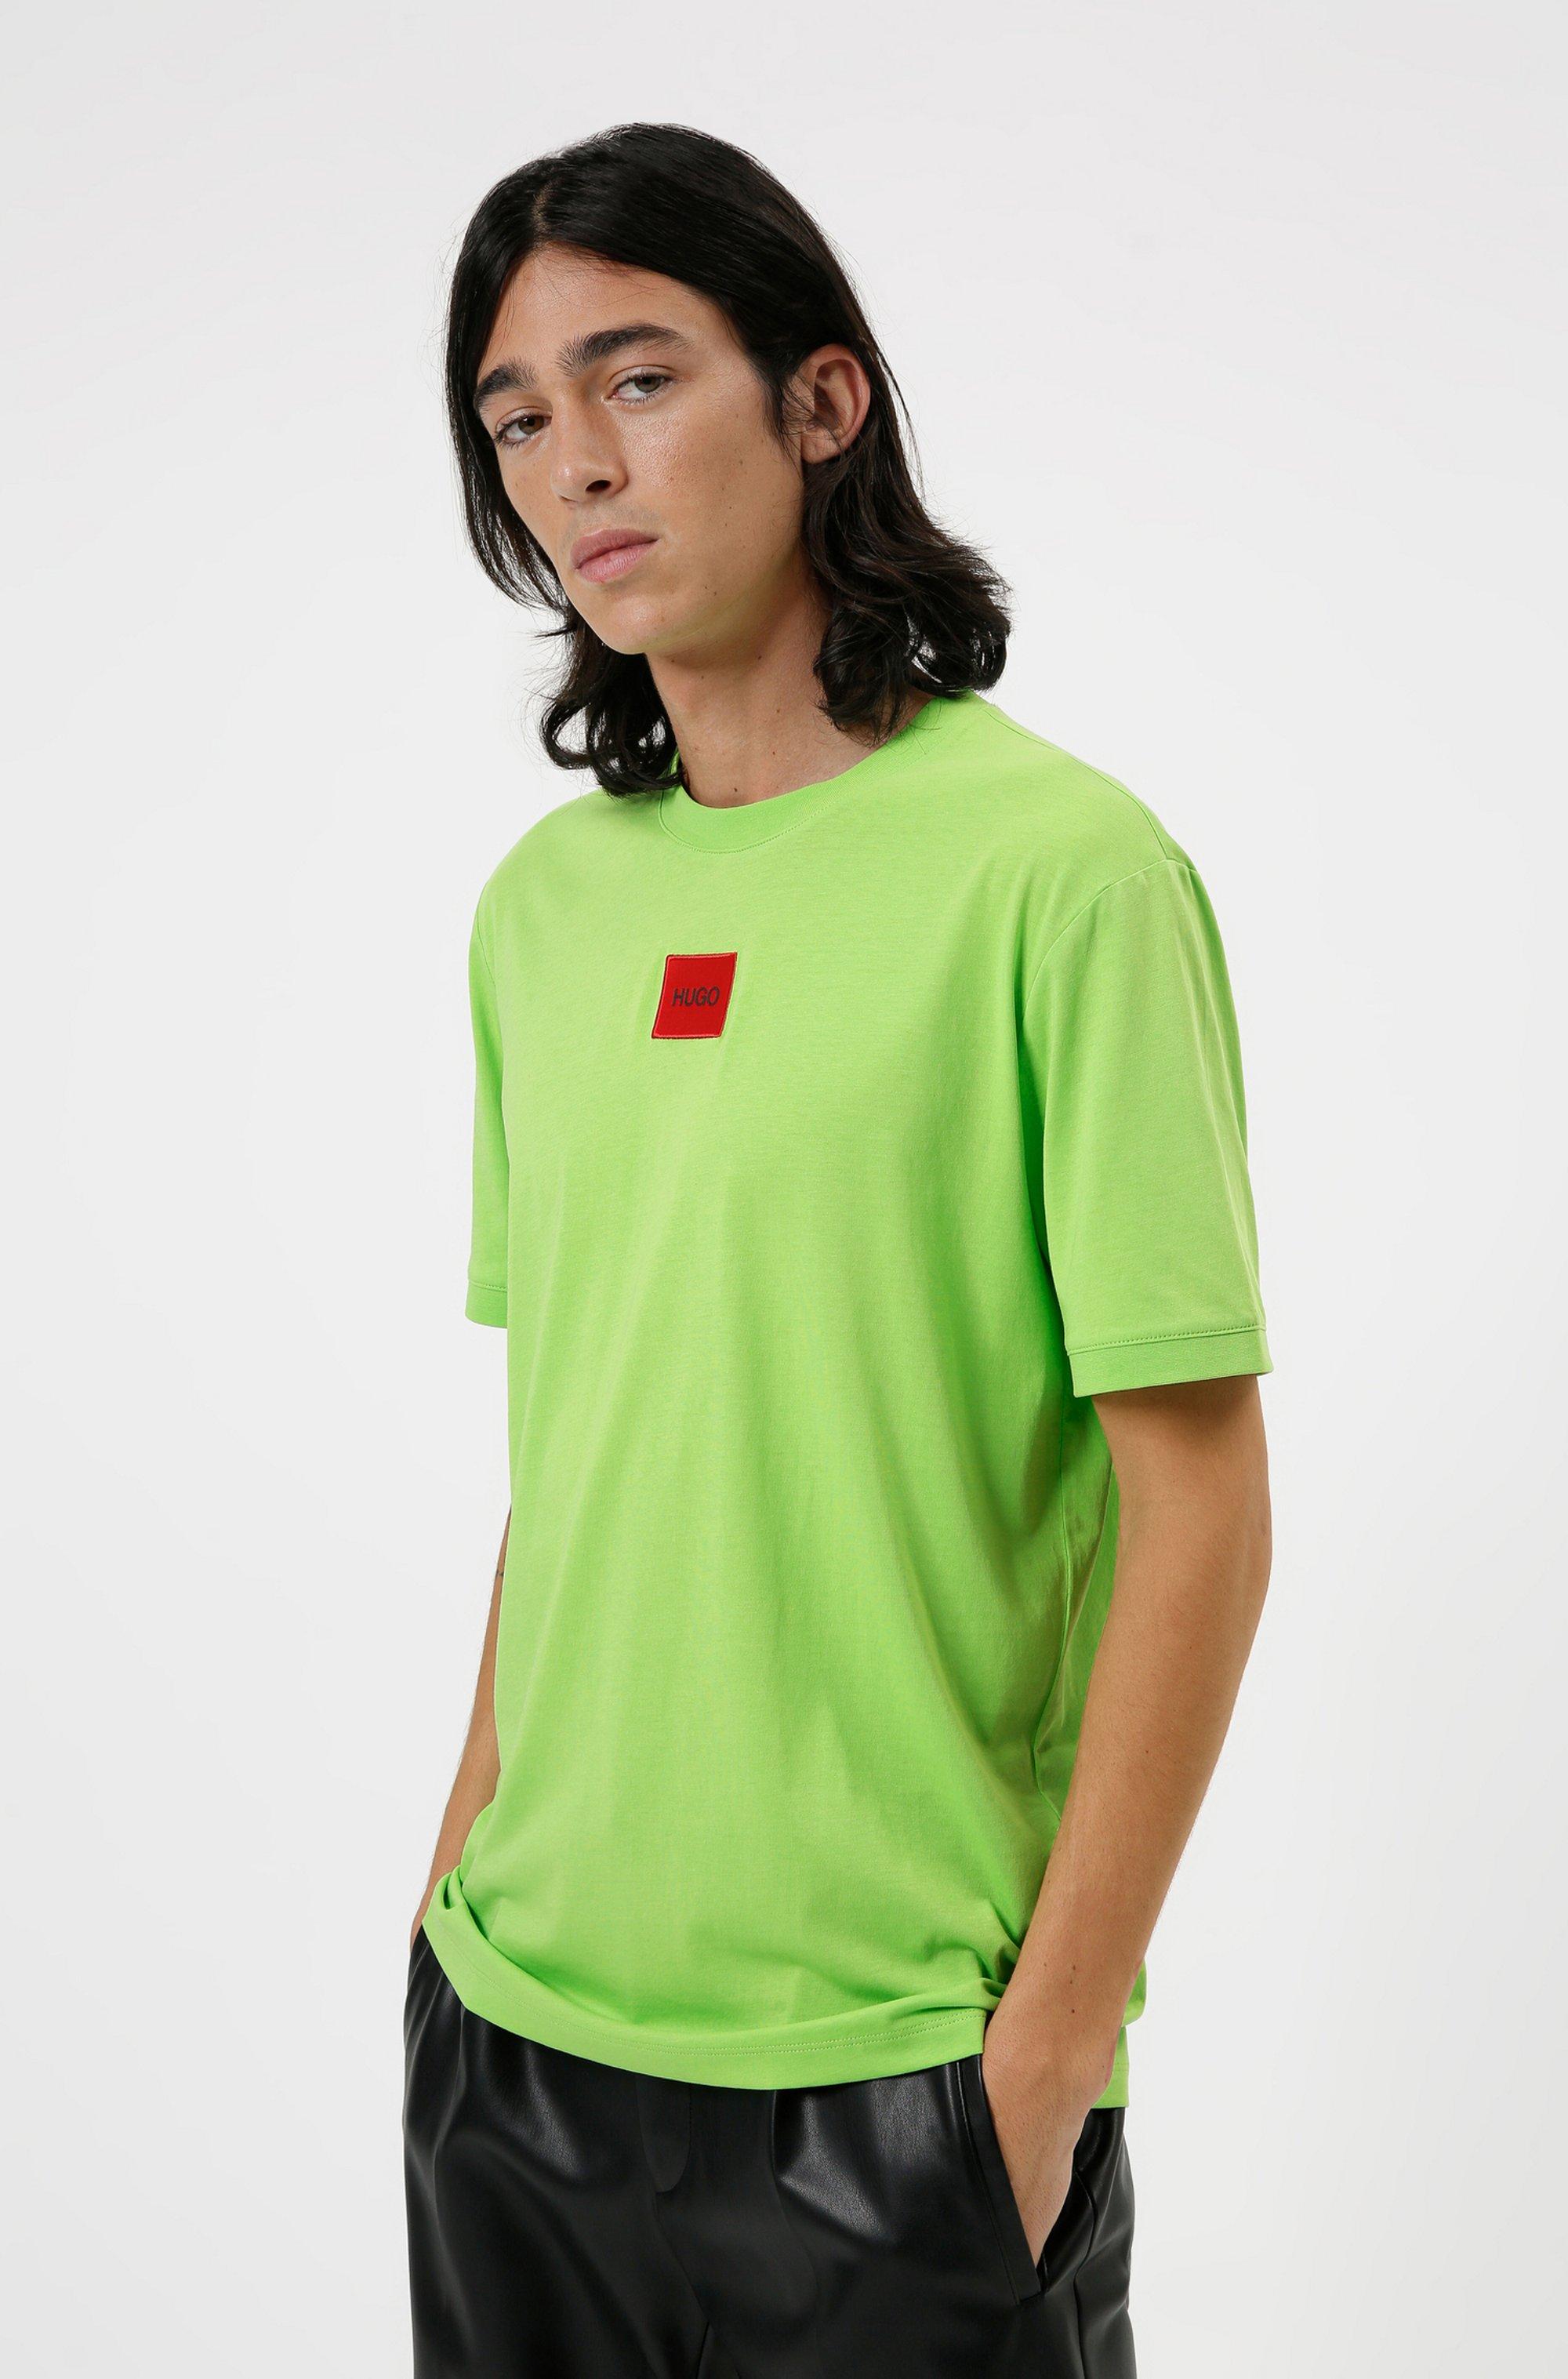 BOSS by HUGO BOSS Regular Fit Cotton T Shirt With Red Logo Label in Green  for Men - Lyst